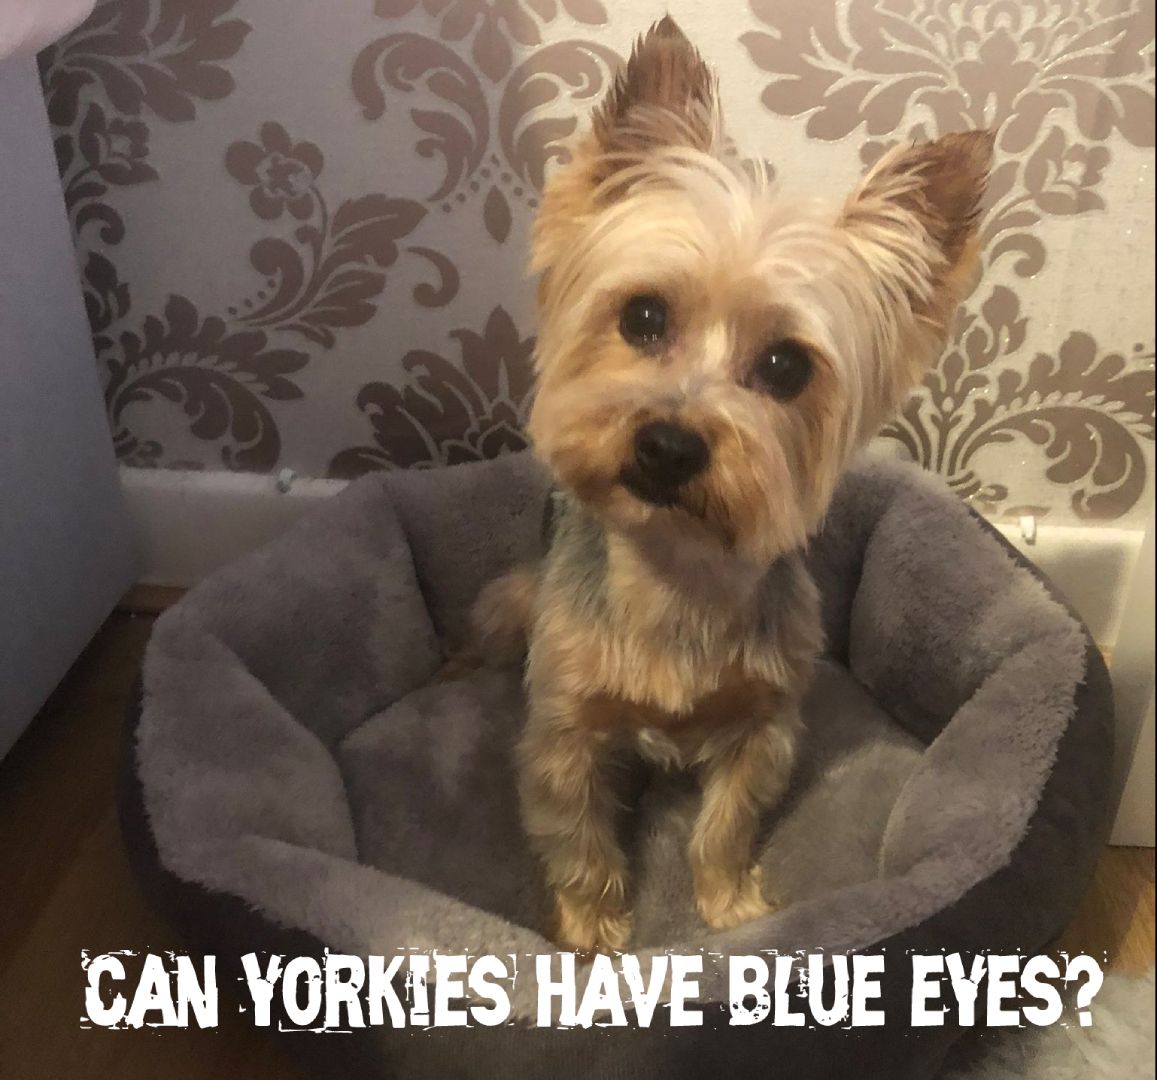 Can Yorkshire Terriers have blue eyes?